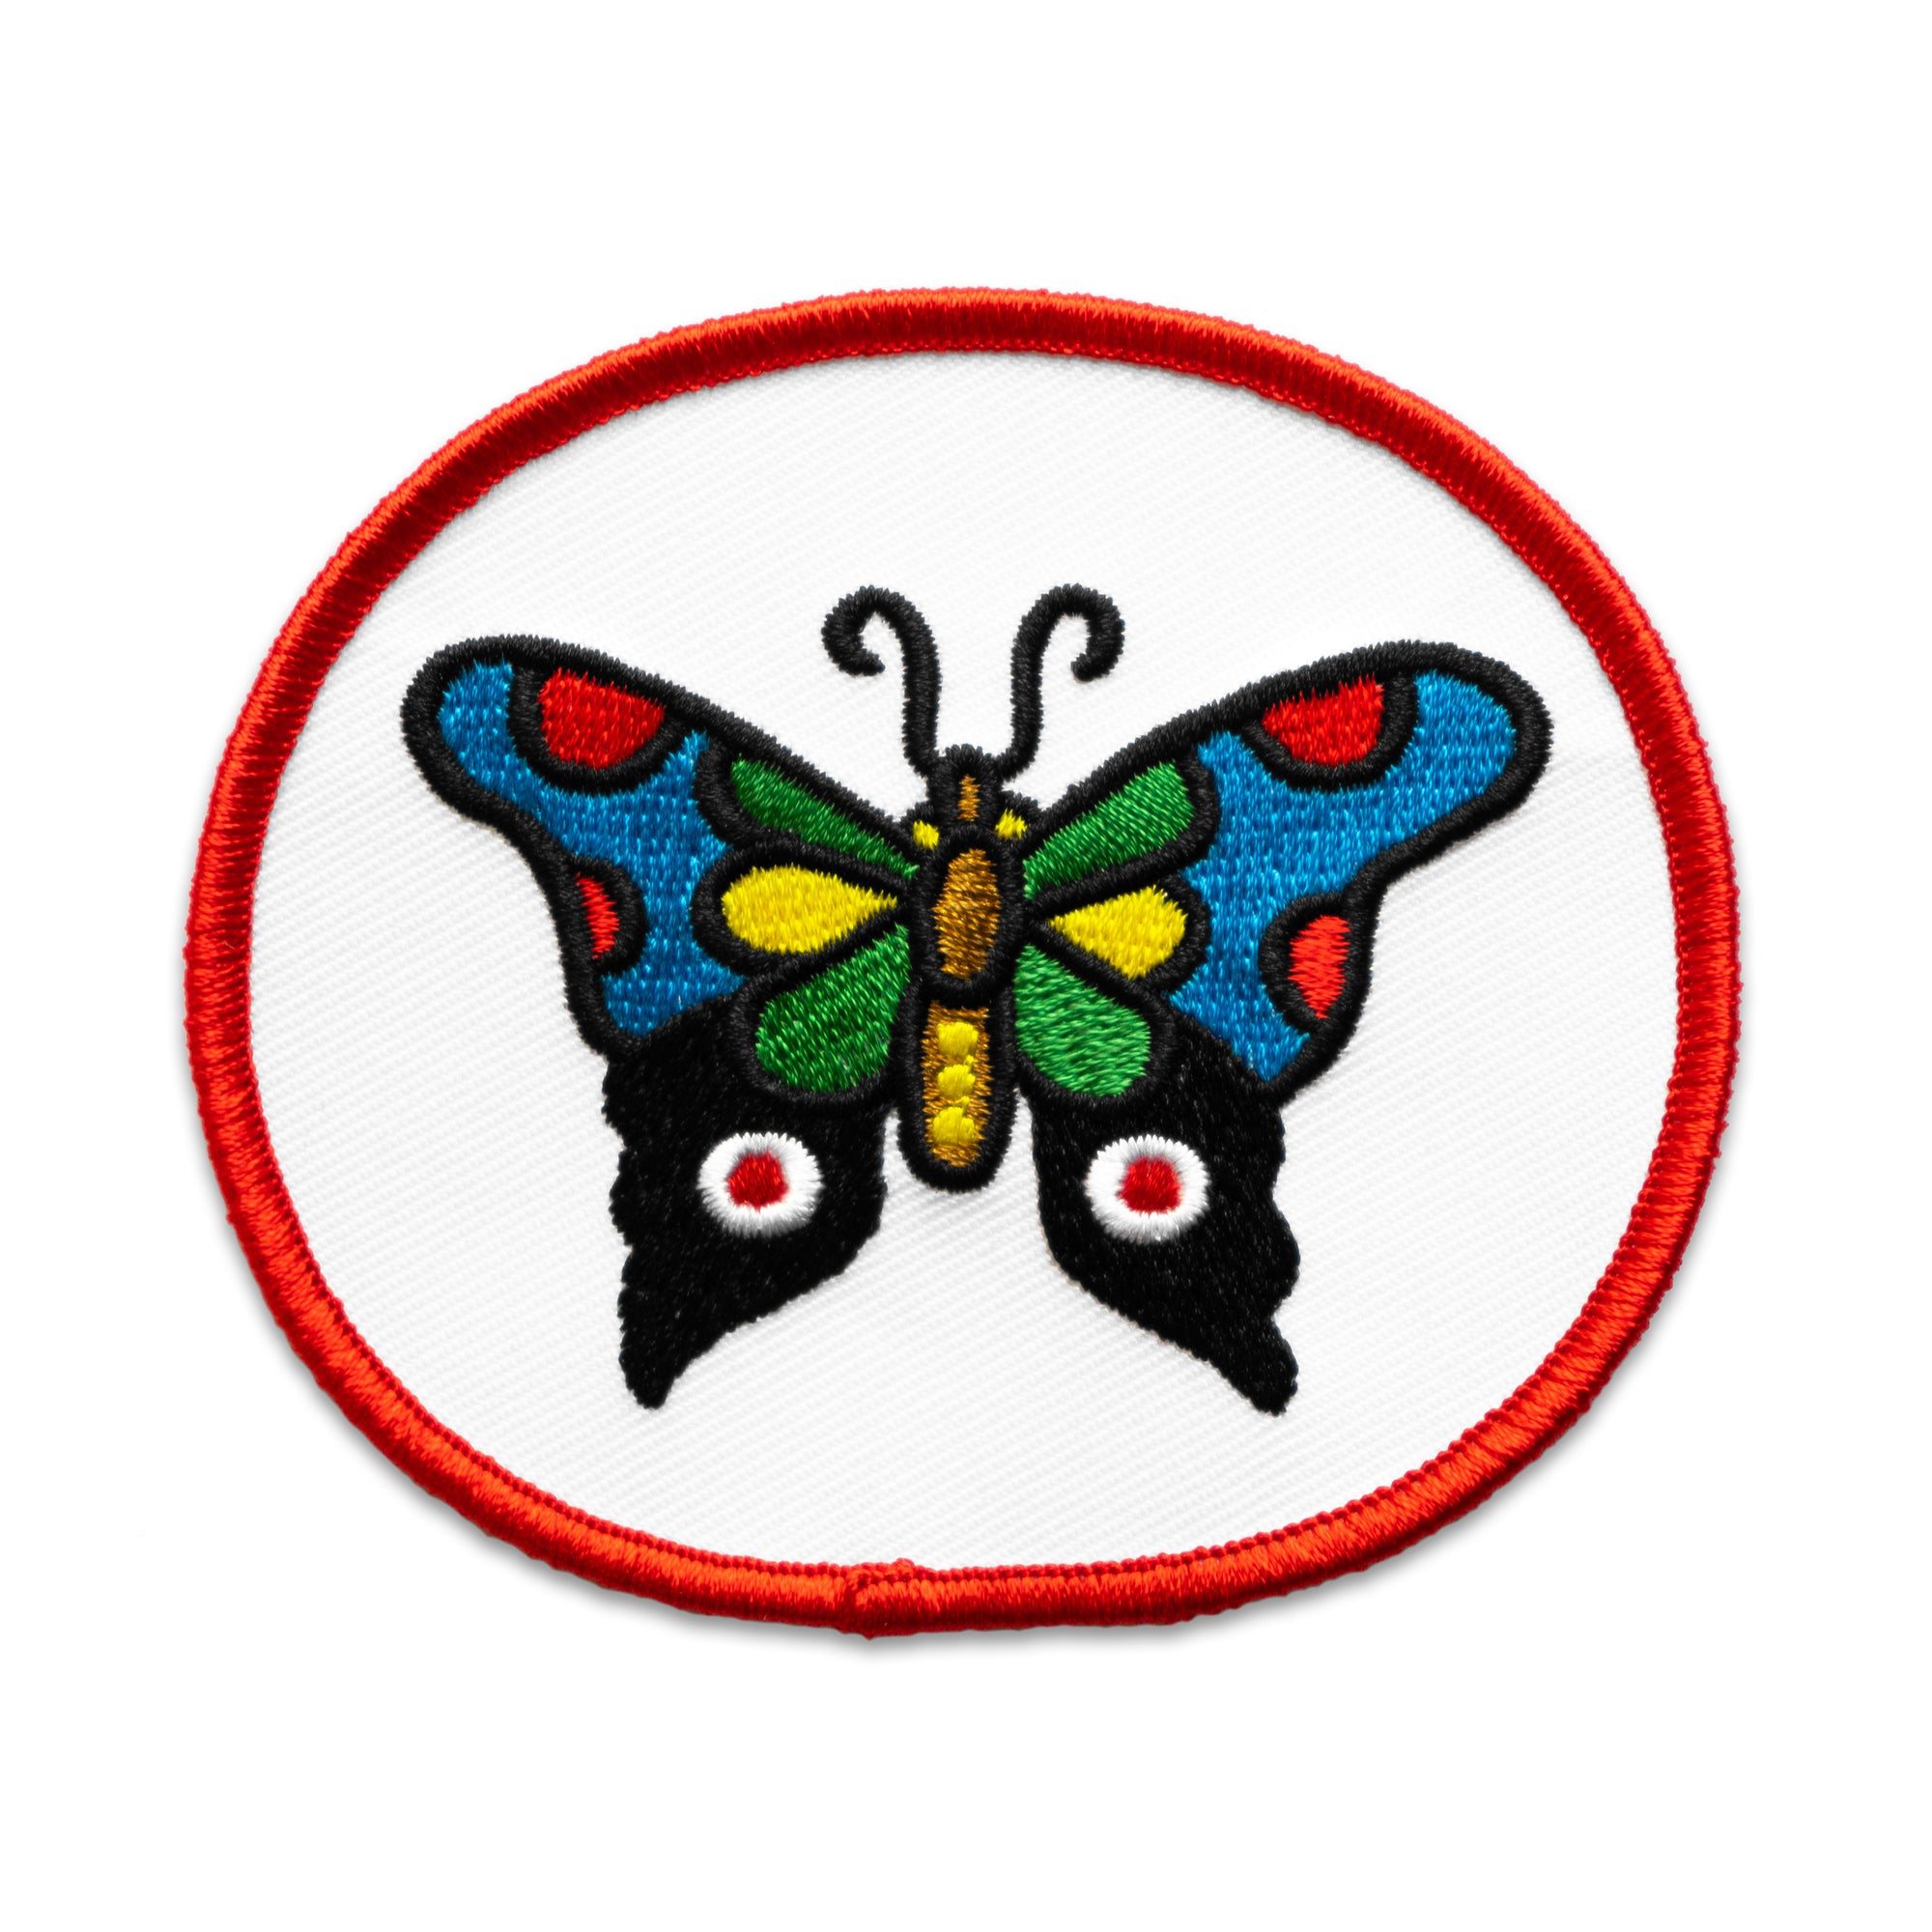 "Butterfly" Patch by No Fun®.  The patch is white with a red edge, in an oval shape.  There is a multi coloured butterfly in the center.